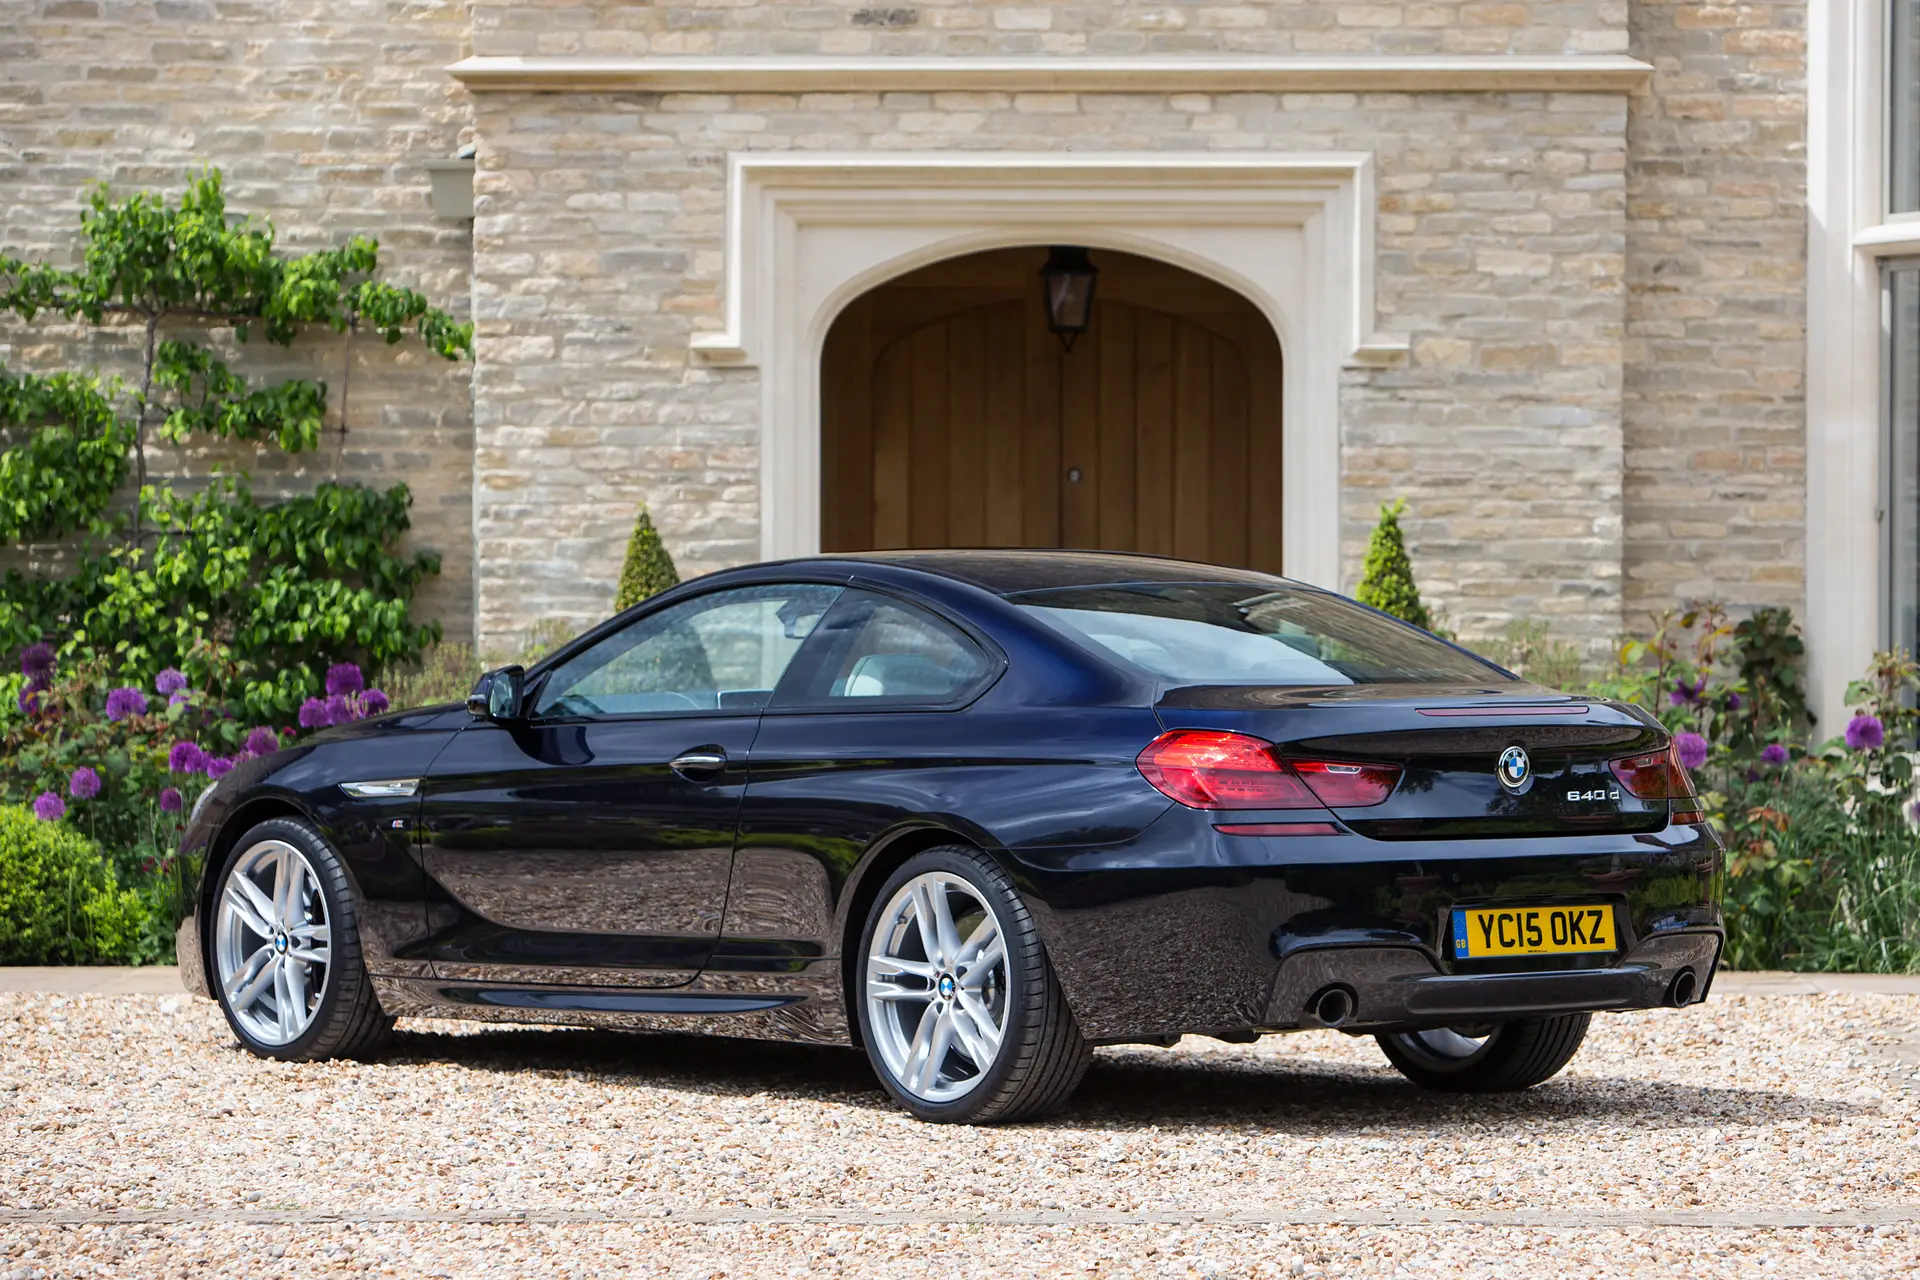 BMW 6 Series (2011-2018) Review: exterior rear three quarter photo of the BMW 6 Series